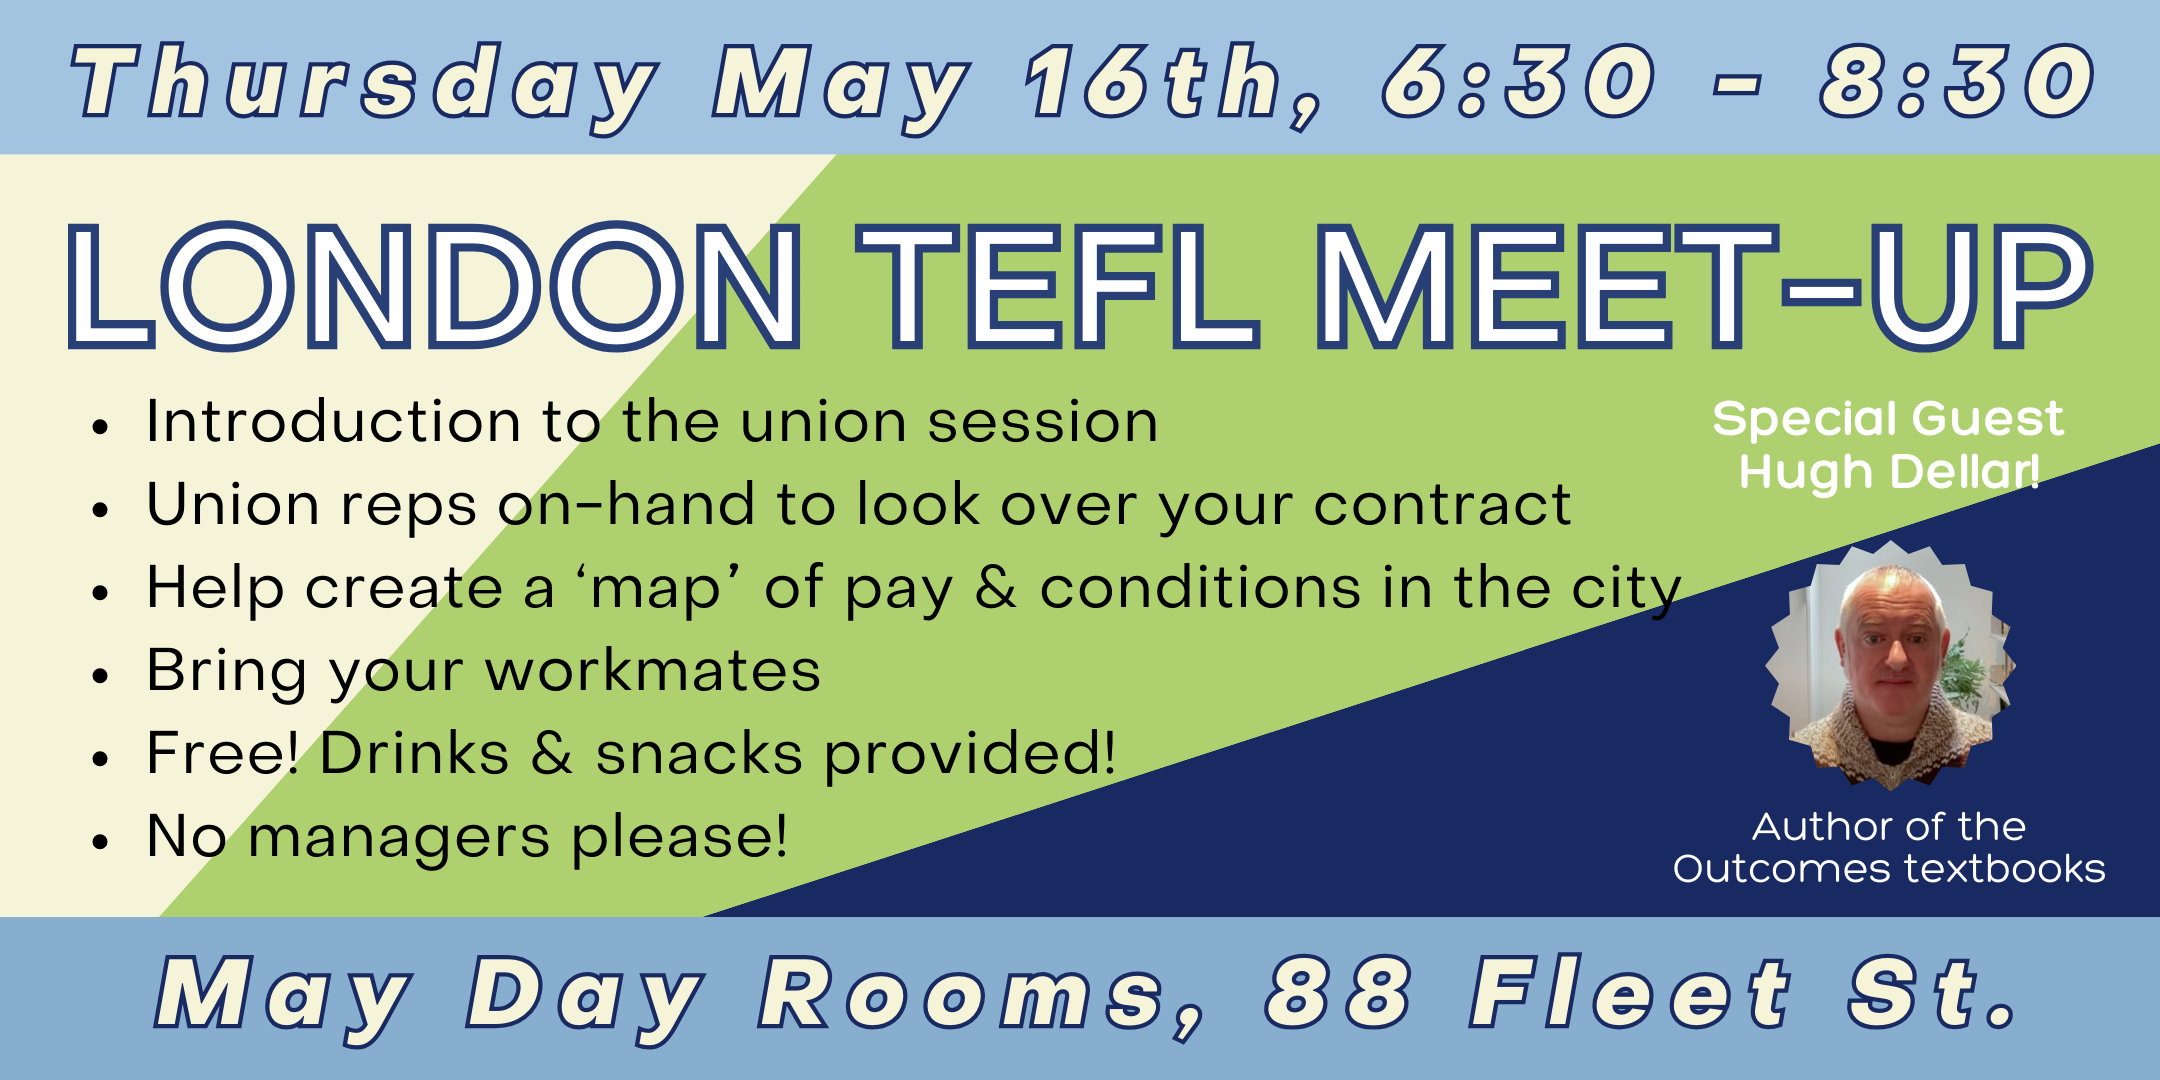 Image reads: London TEFL Meet-up, Thursday May 16th, 6:30 - 8:30, May Day Rooms, 88 Fleet Street